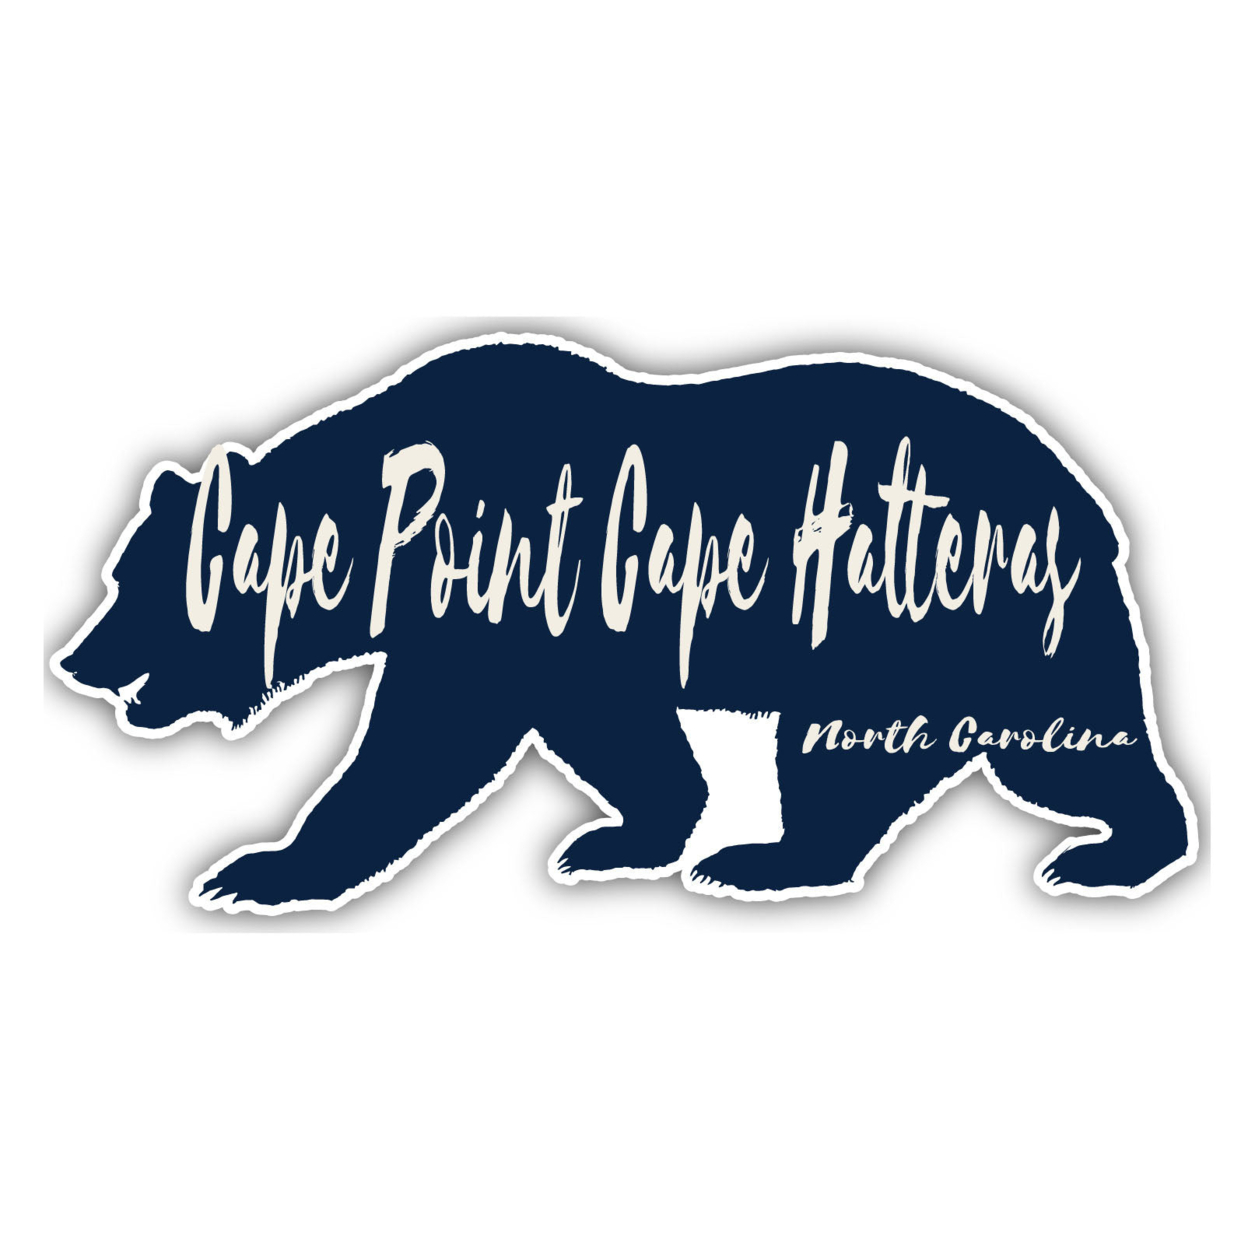 Cape Point Cape Hatteras North Carolina Souvenir Decorative Stickers (Choose Theme And Size) - 4-Pack, 6-Inch, Bear